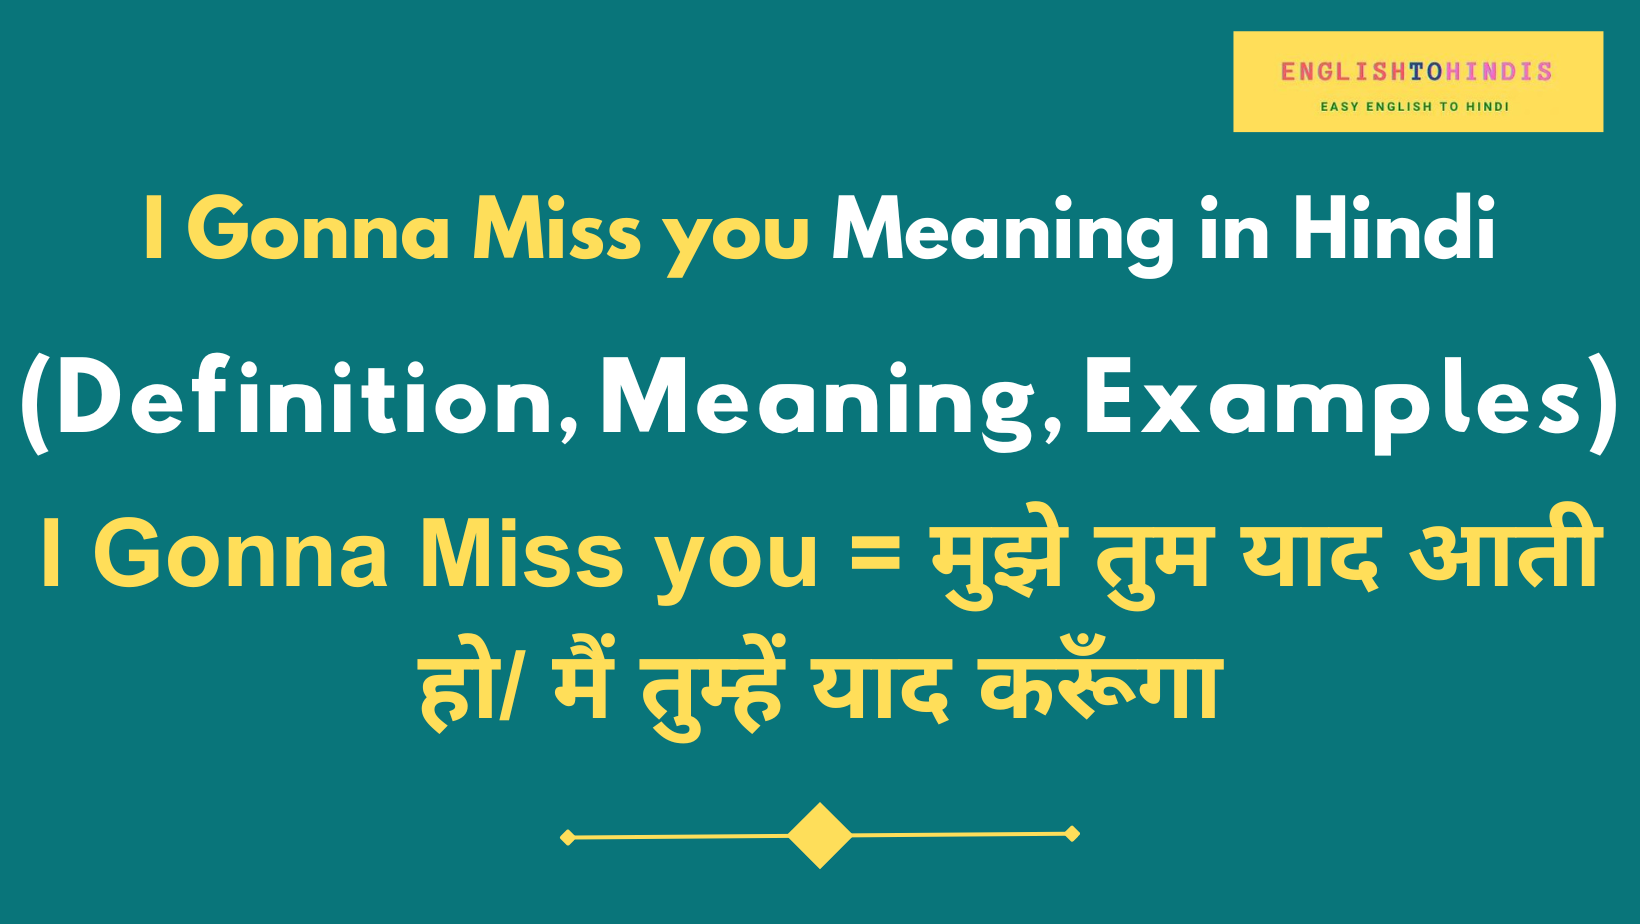 I Gonna Miss you Meaning in Hindi